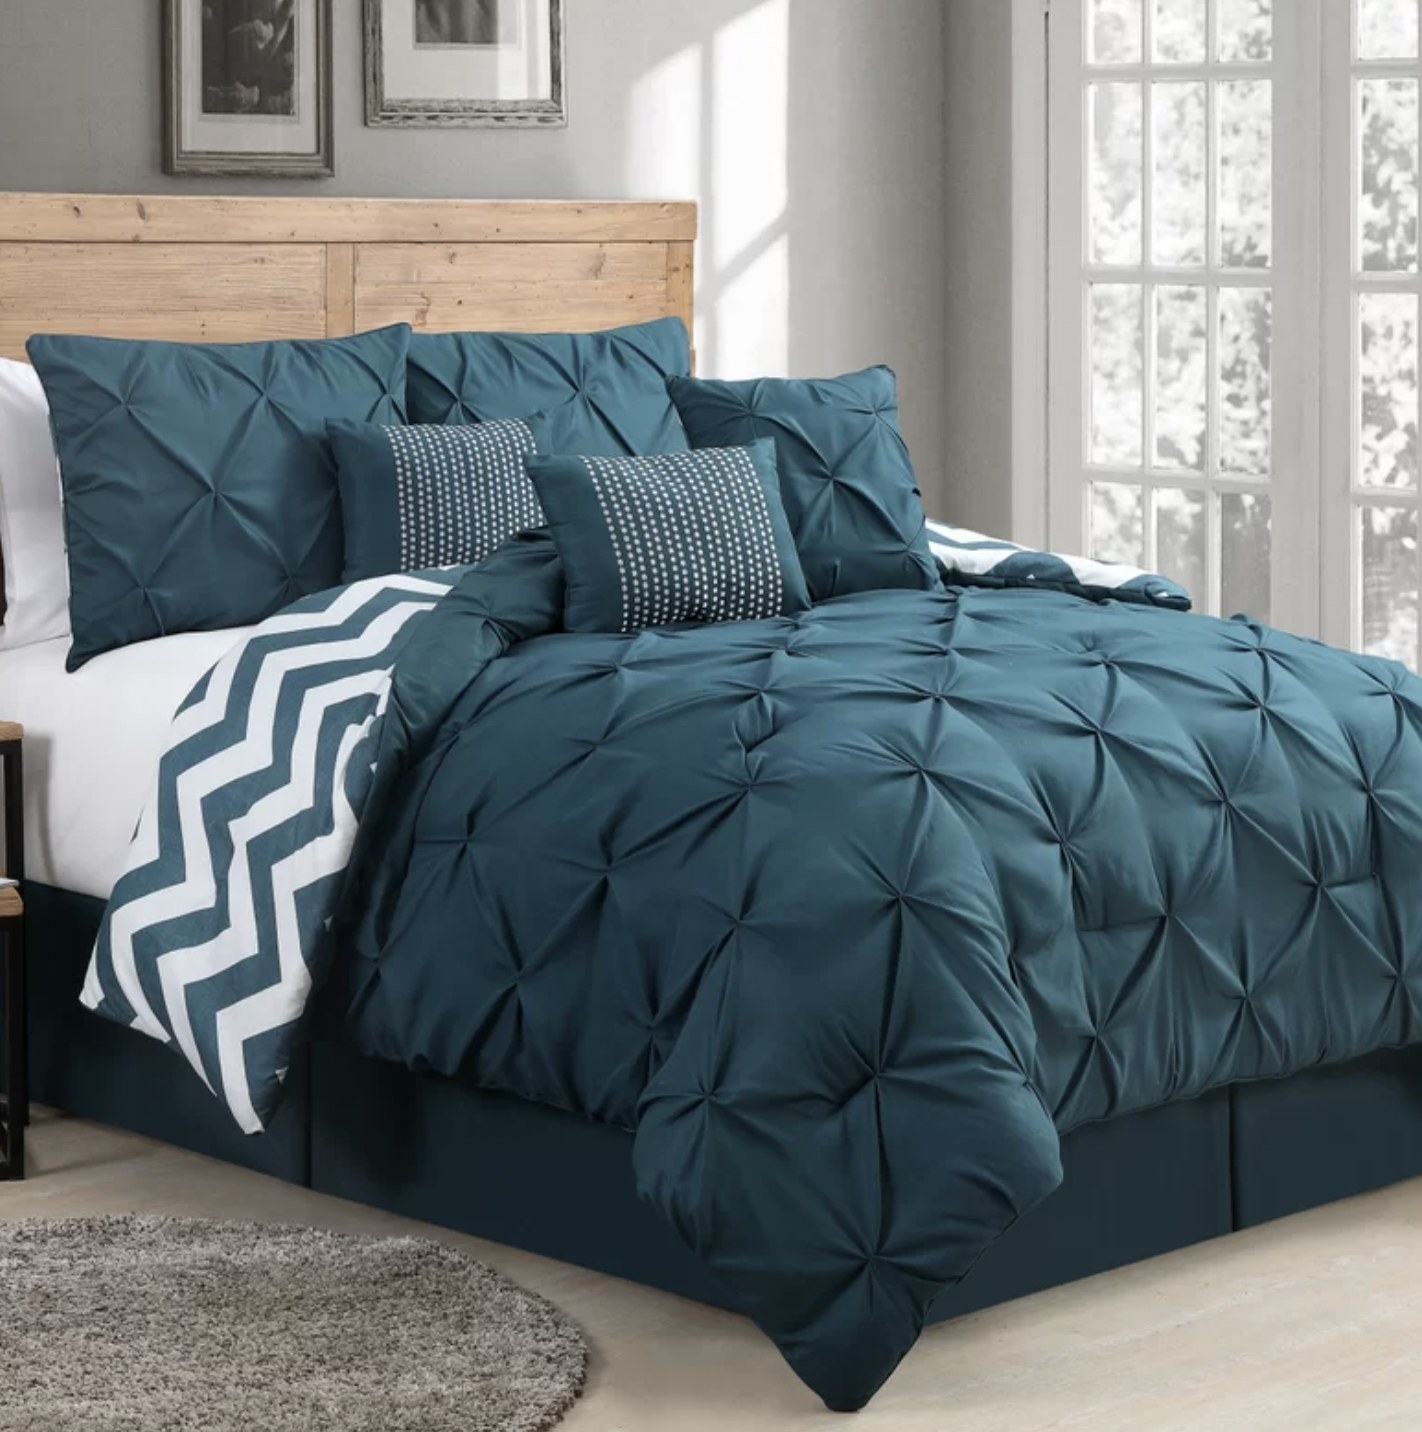 The blue comforter set with throw pillows on bed